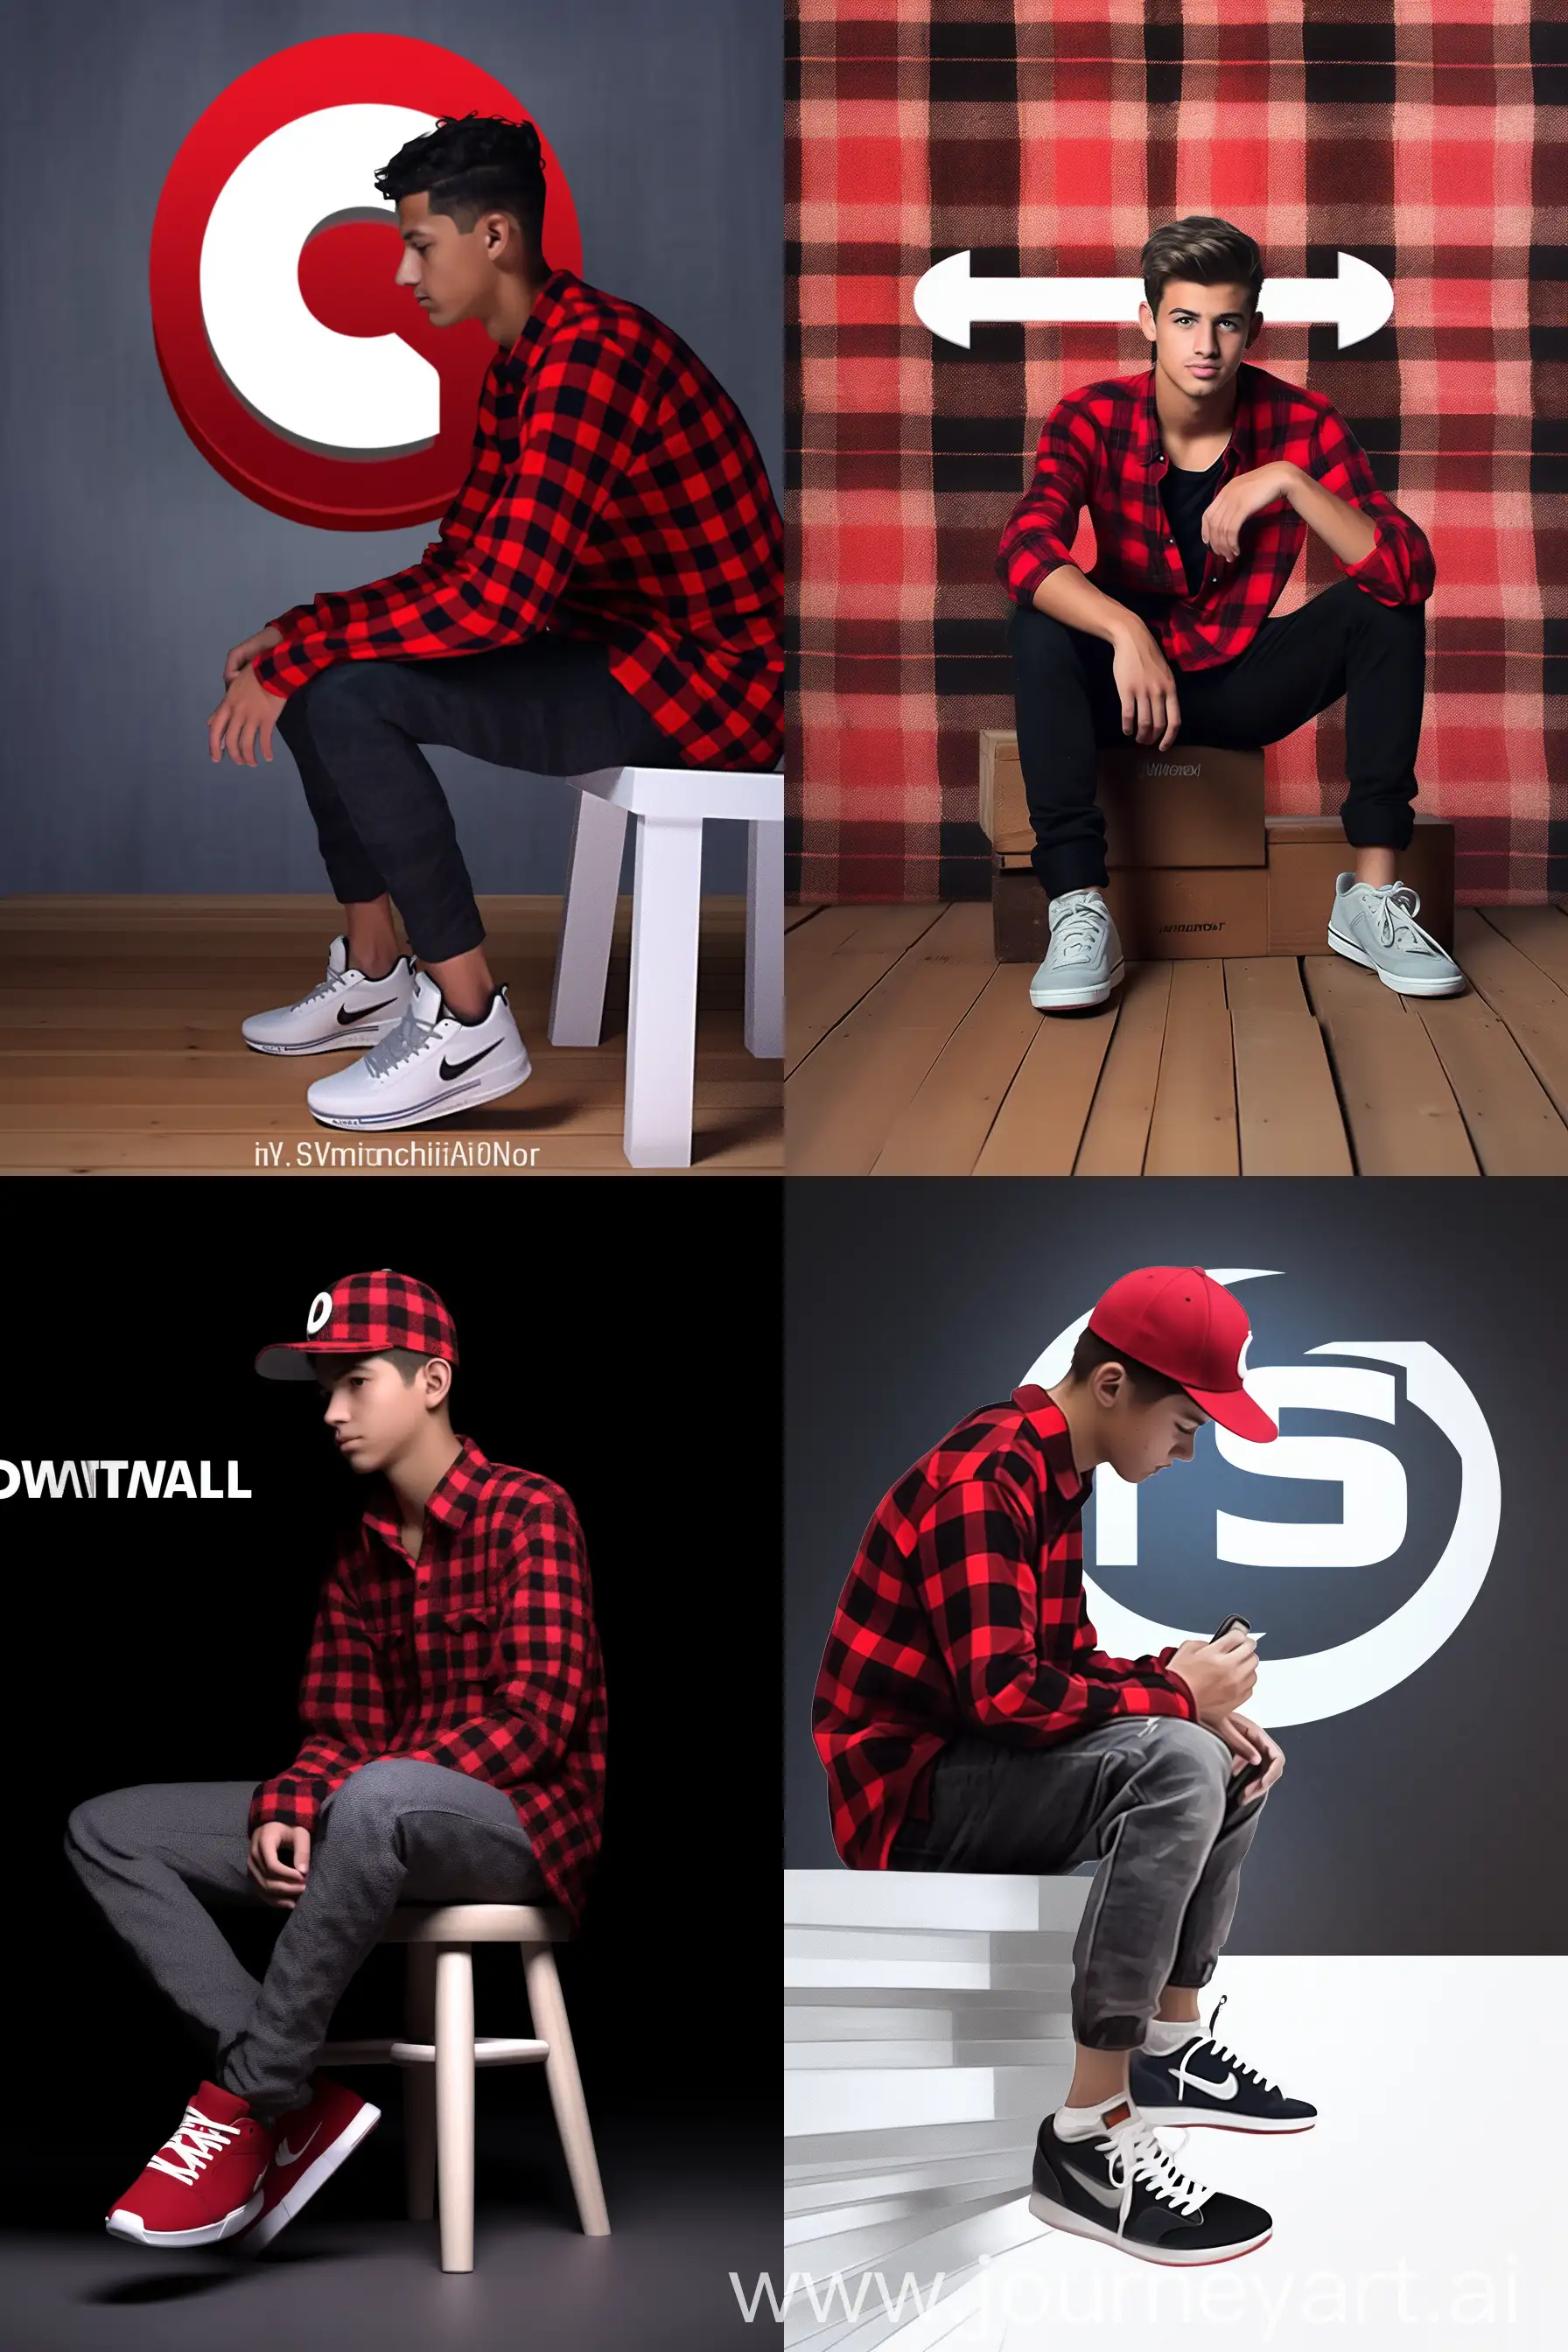 Generate a realistic image of a 27-year-old boy engrossed in coding, seated in front of a 3D ‘Instagram’ logo. Dress him in a red and black flannel shirt, black pant, jordan sneakers, and Snapback. The backdrop should showcase a social media profile with the username ‘ichwanfaithal’ and a corresponding profile picture --niji 5 --ar 2:3